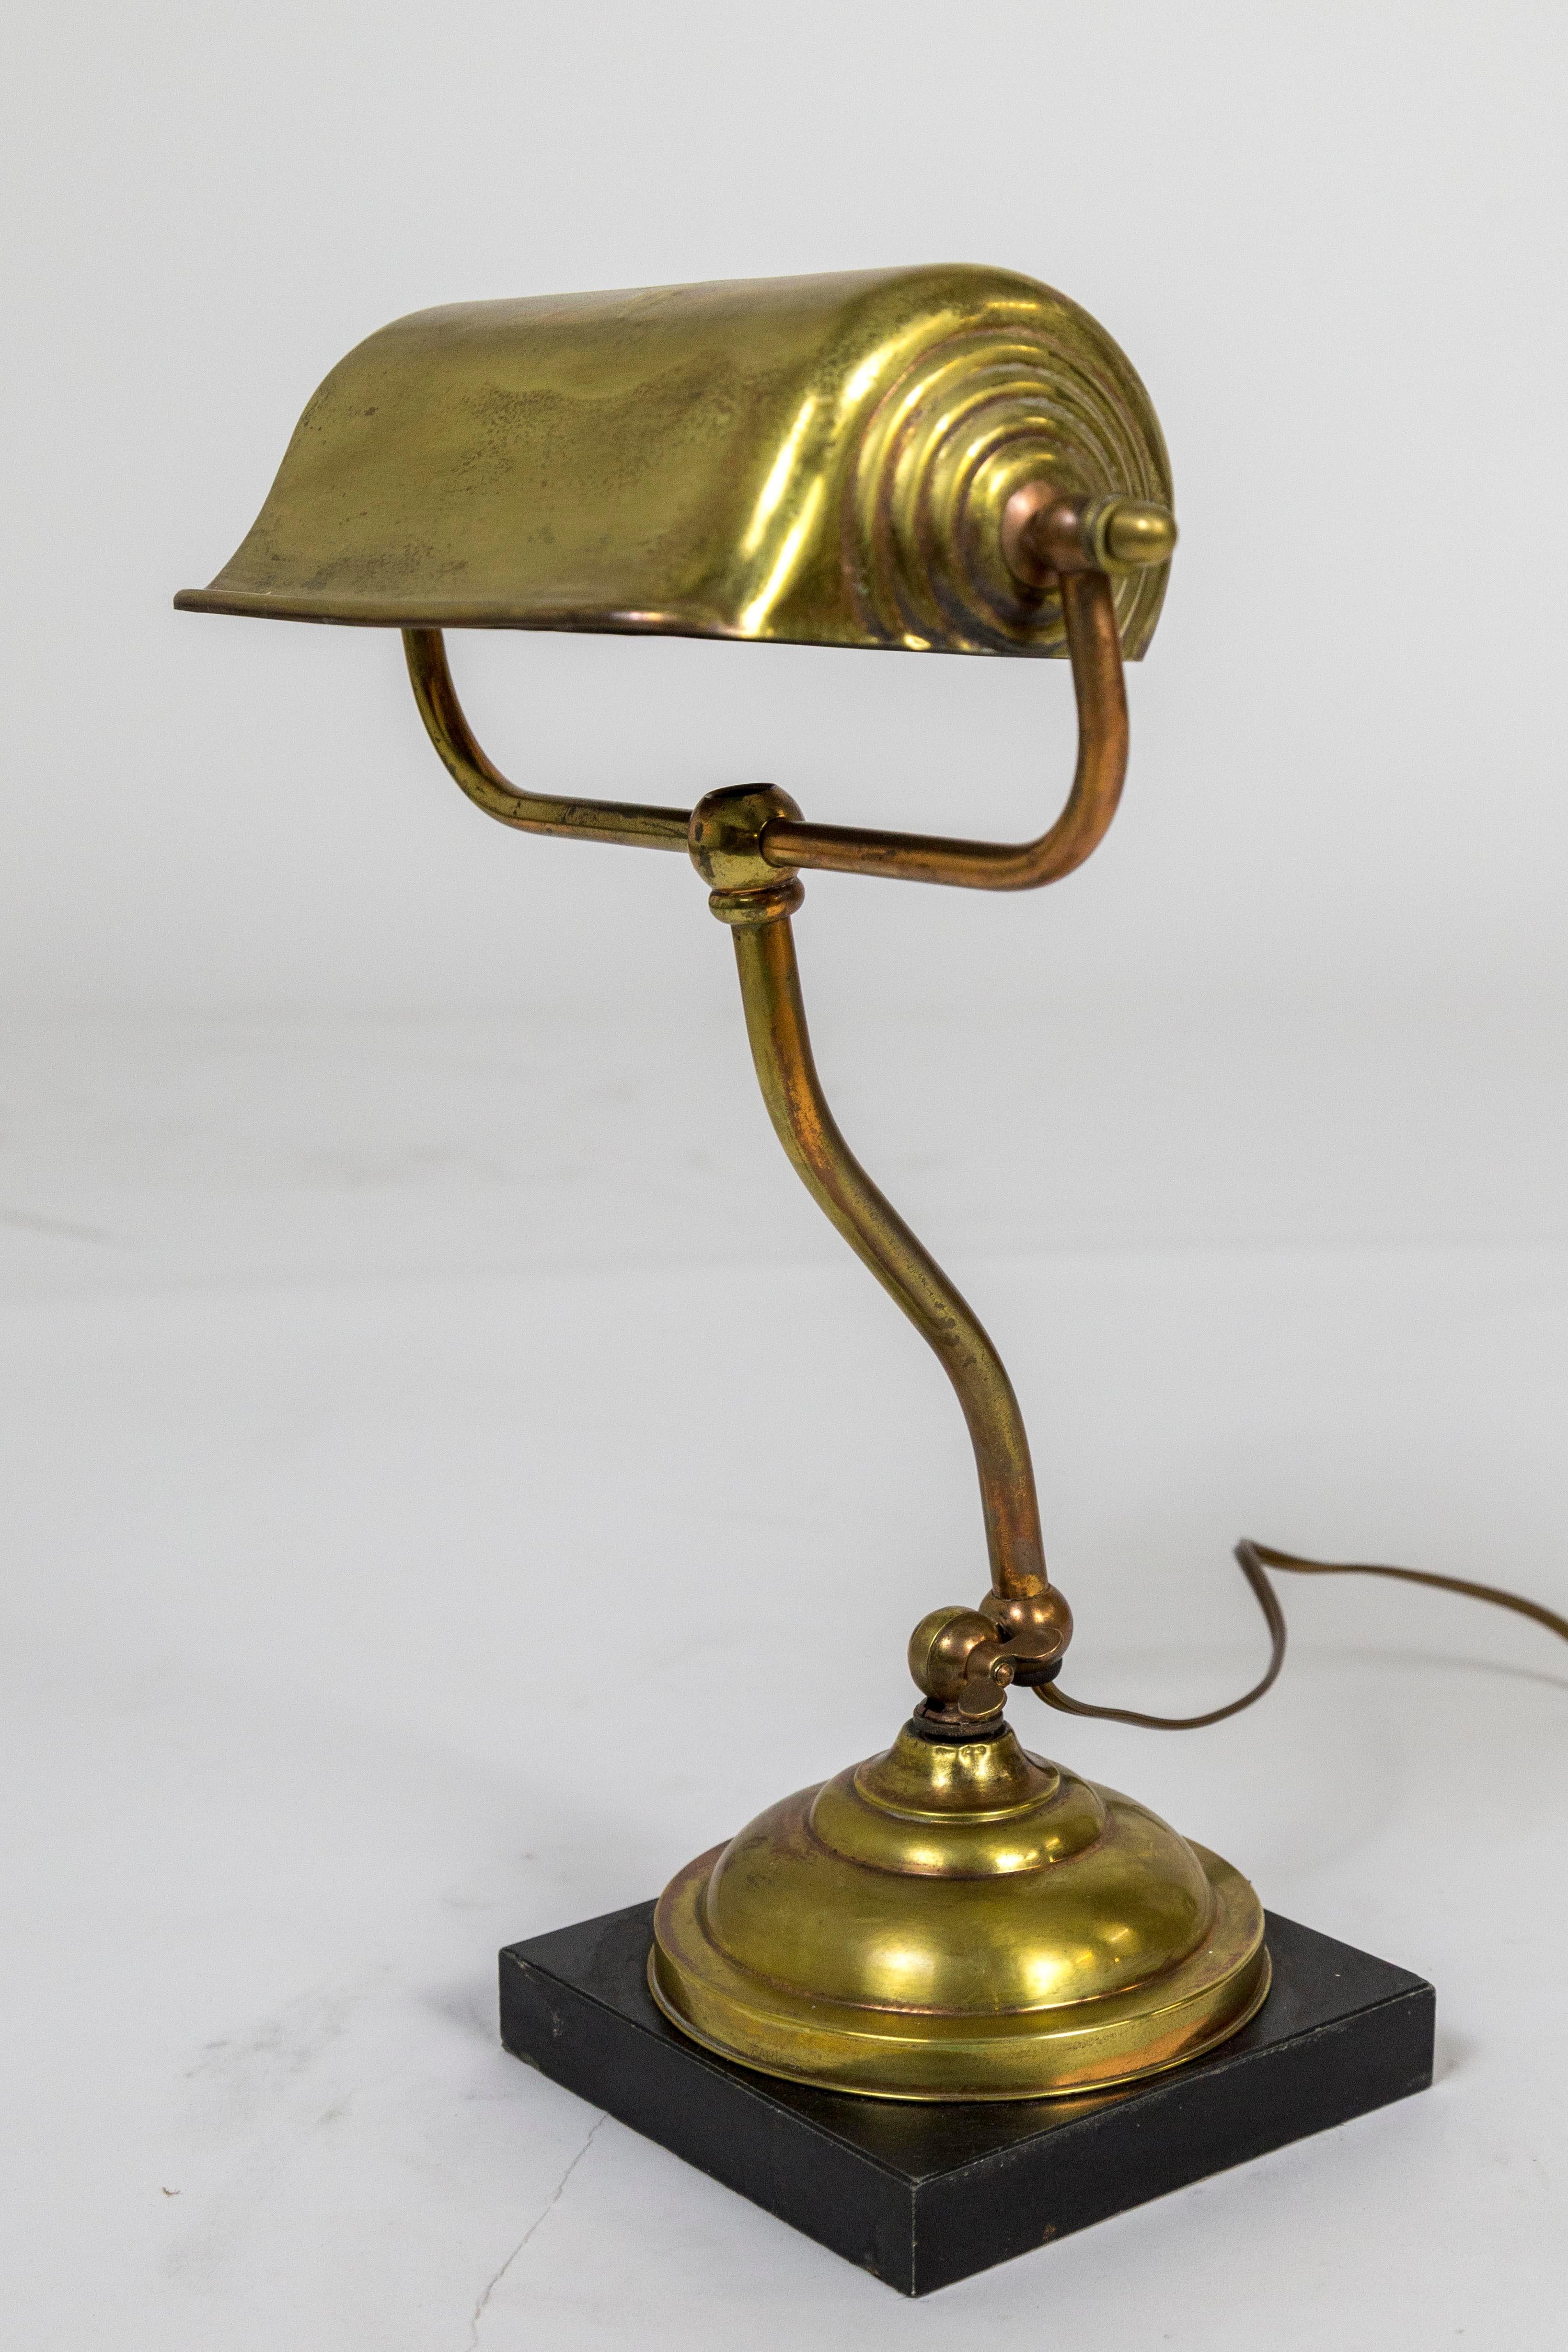 American brass and copper desk lamp with a curved stem and black, square marble base. The shade has circular details that give it a snail shape from the side, 1940s. Adjustable. One medium base socket, newly wired. 6.5” square base, shade 9”x 2.5” x